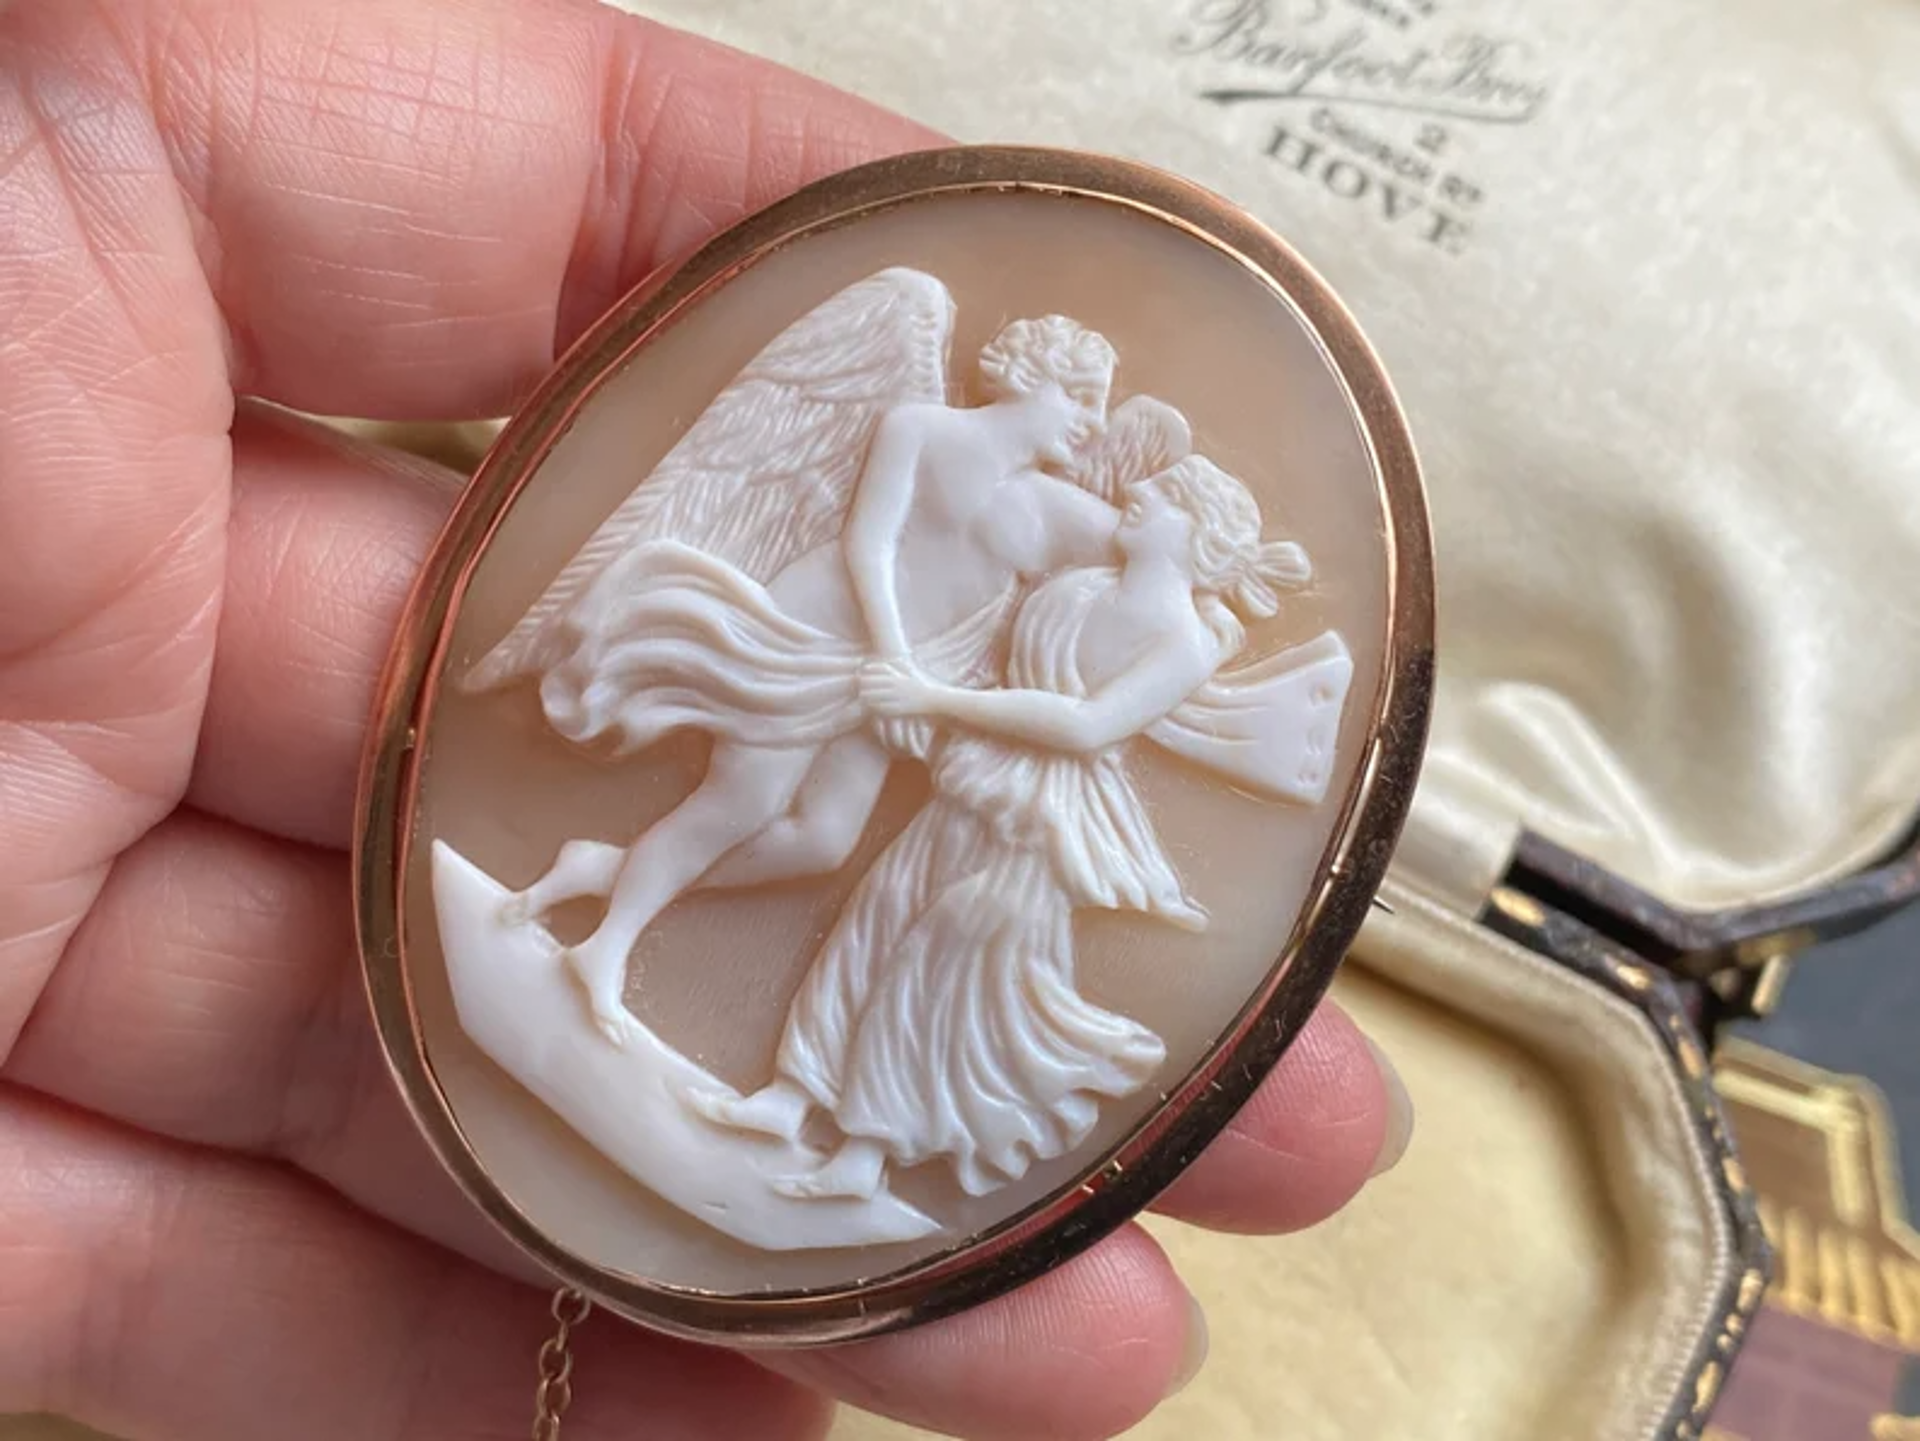 9ct gold psyche & Eros (cupid), expert carved shell cameo sweetheart brooch/pin, signed by Cameo